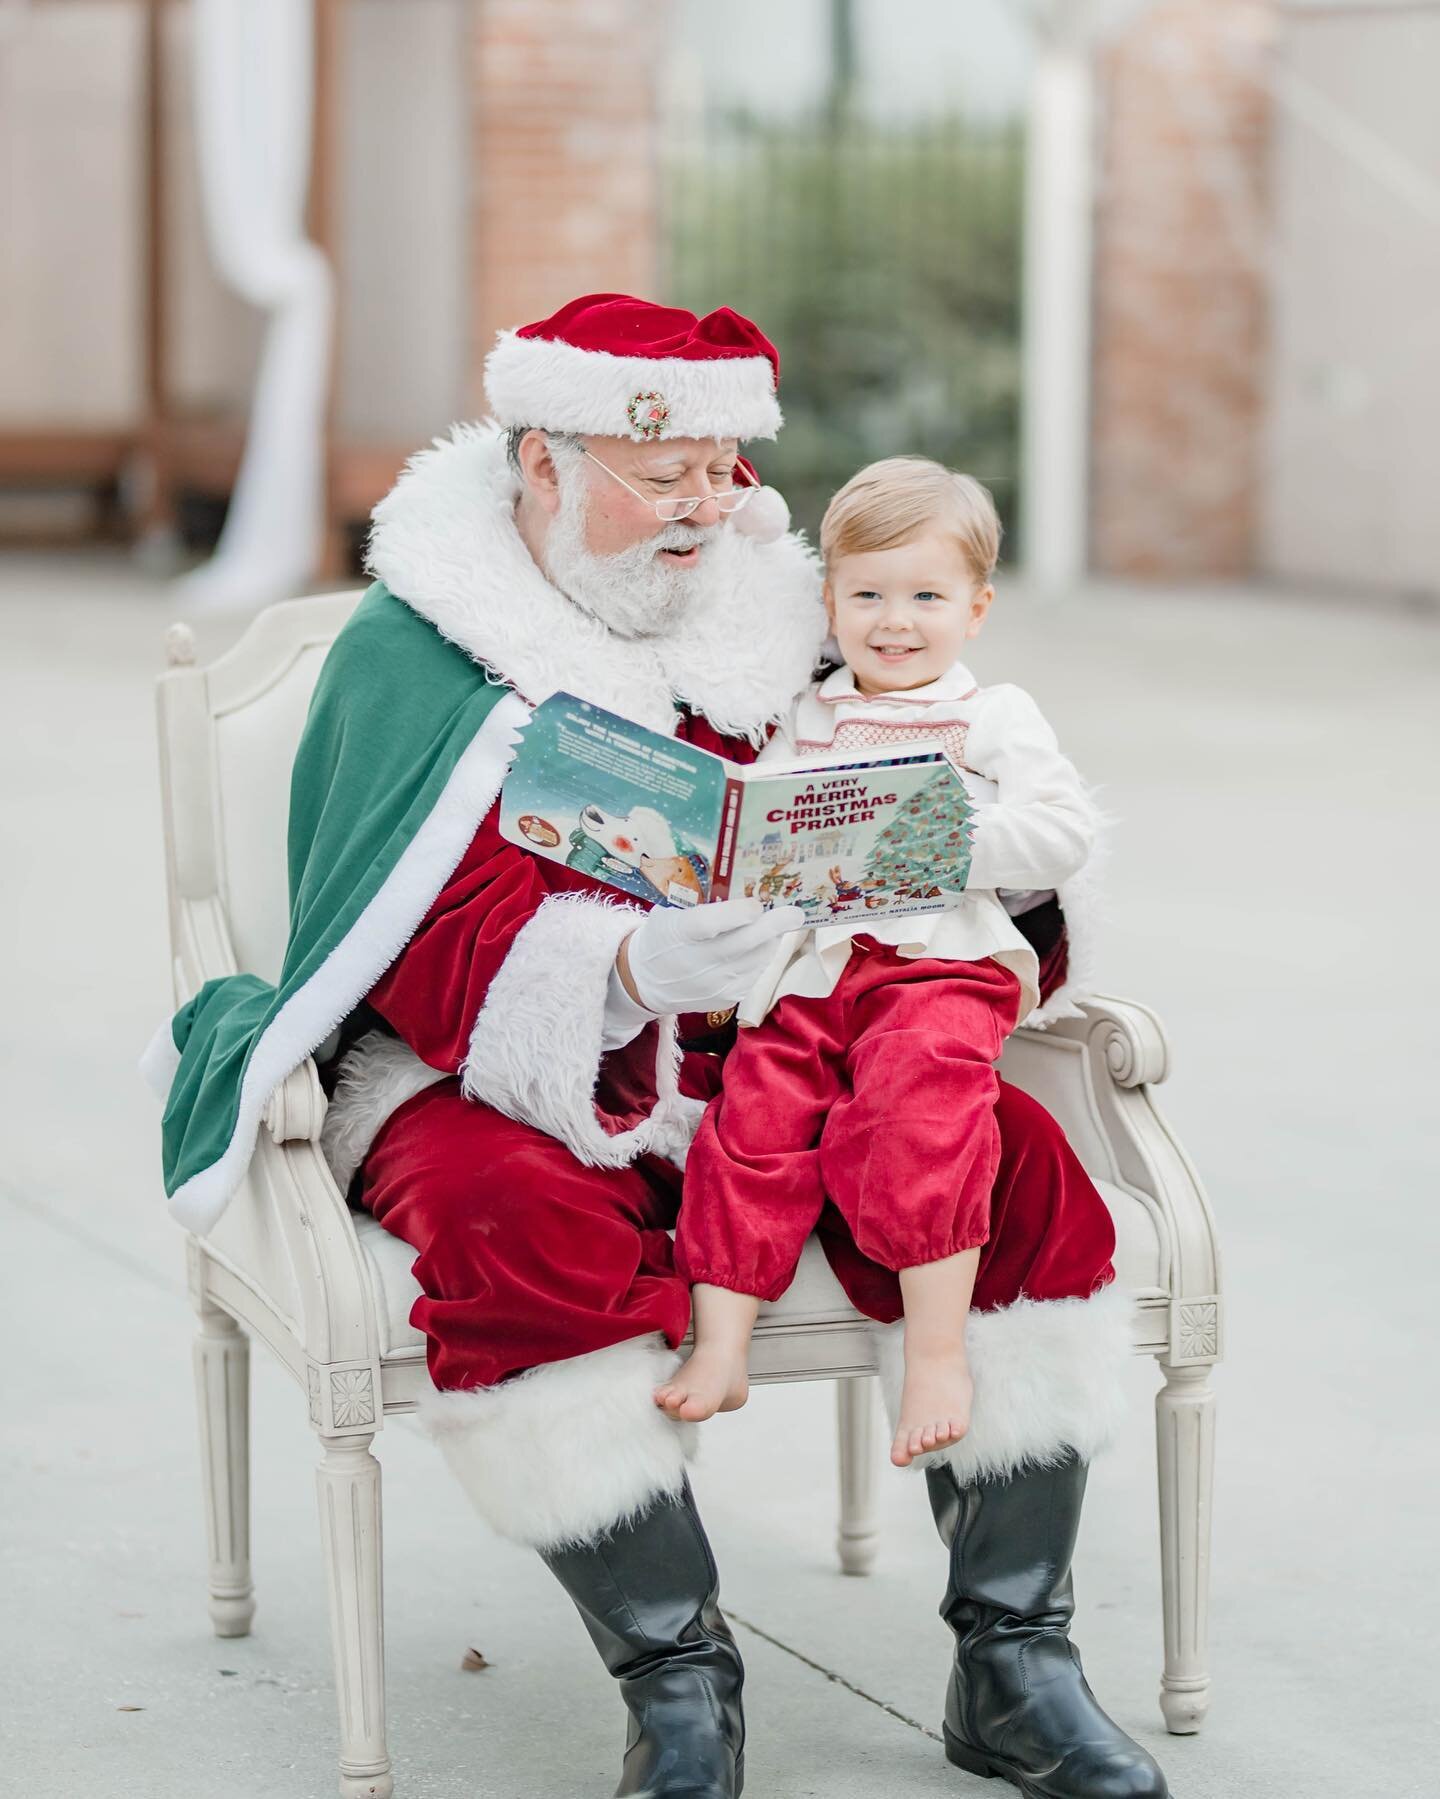 Okay, we interrupt our usual wedding post for some Christmas cuteness! @cassiedavisphoto and @nmendenhallphoto held a Santa session at The avenue Fairhope and it turned out absolutely adorable.